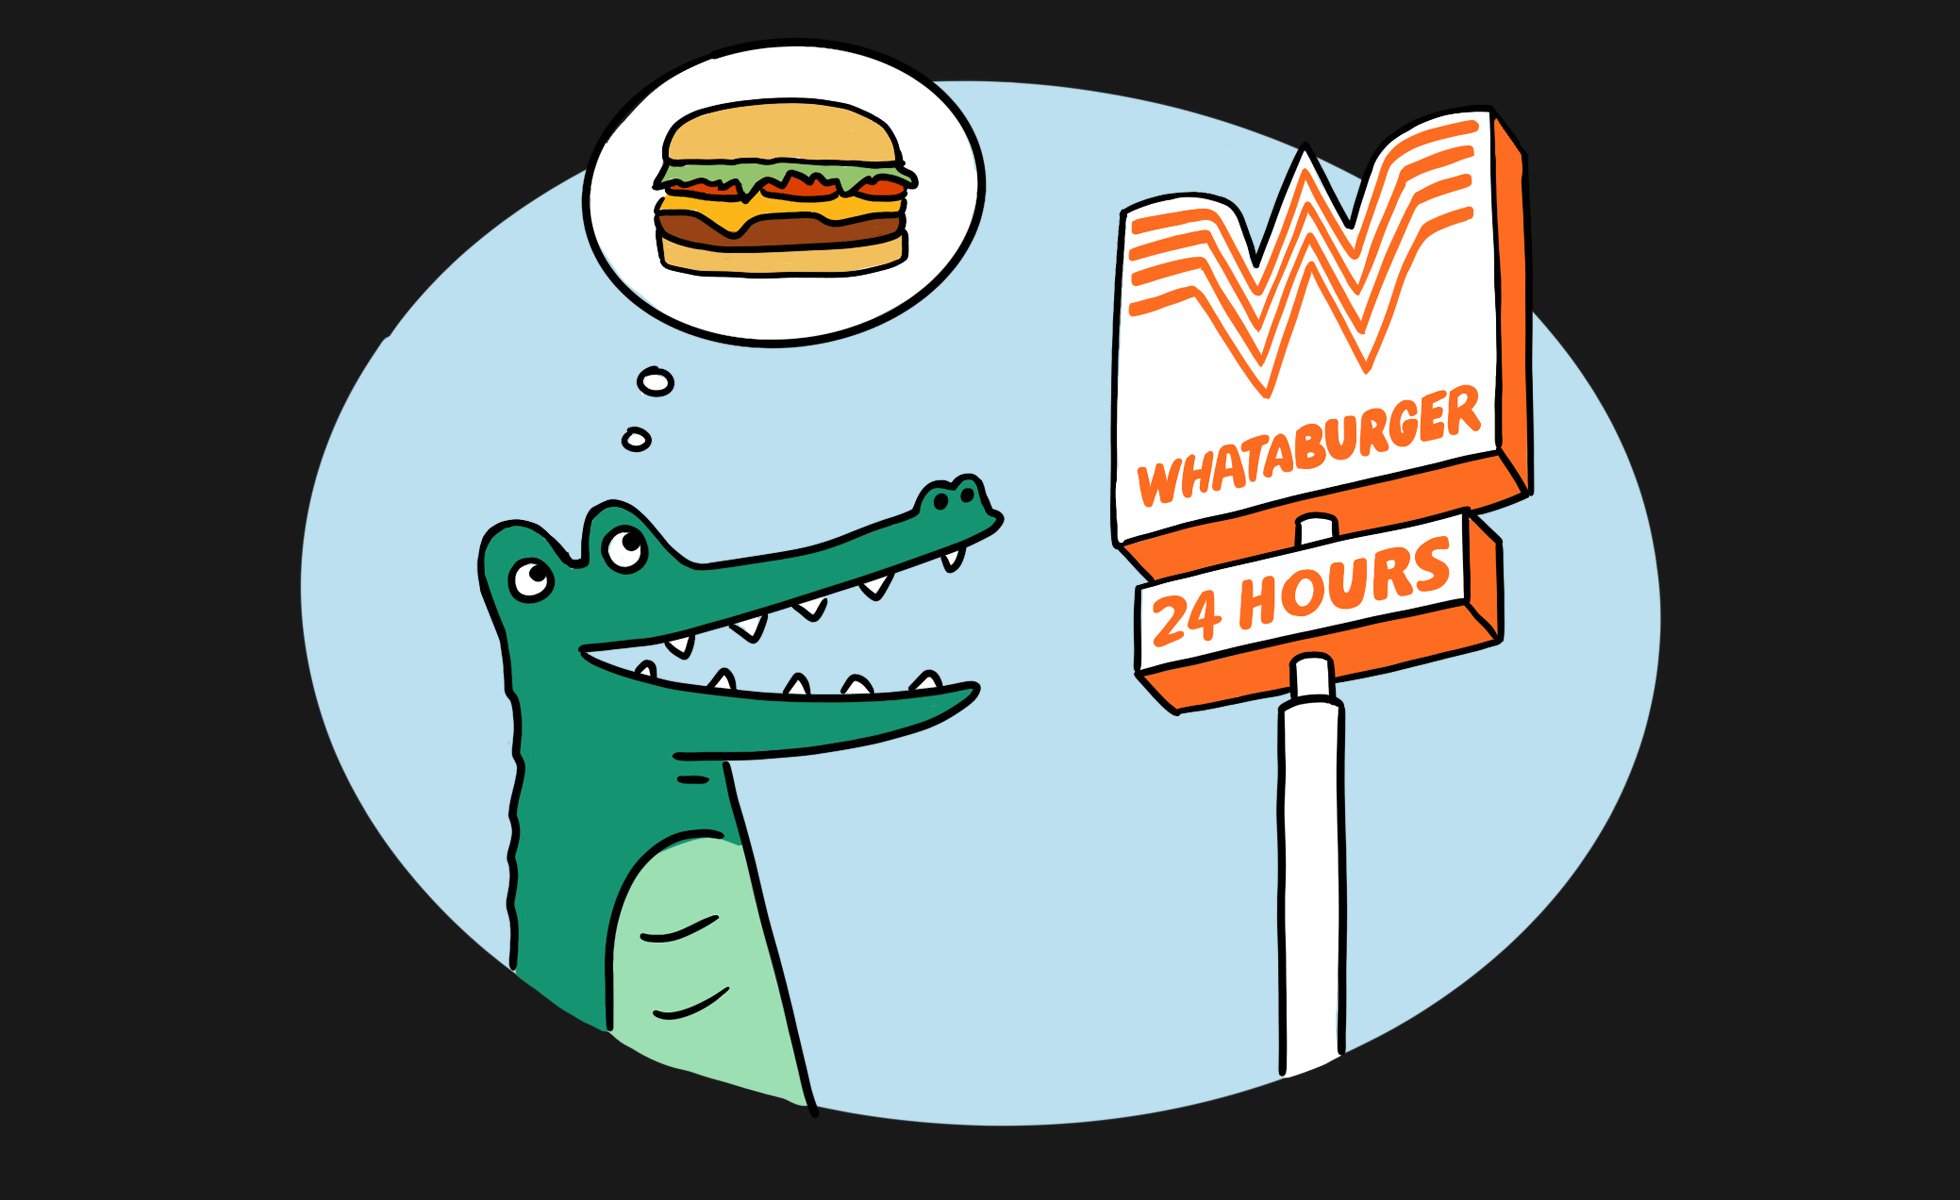 Illustration: An alligator thinks of a hamburger while looking at the Whataburger sign.